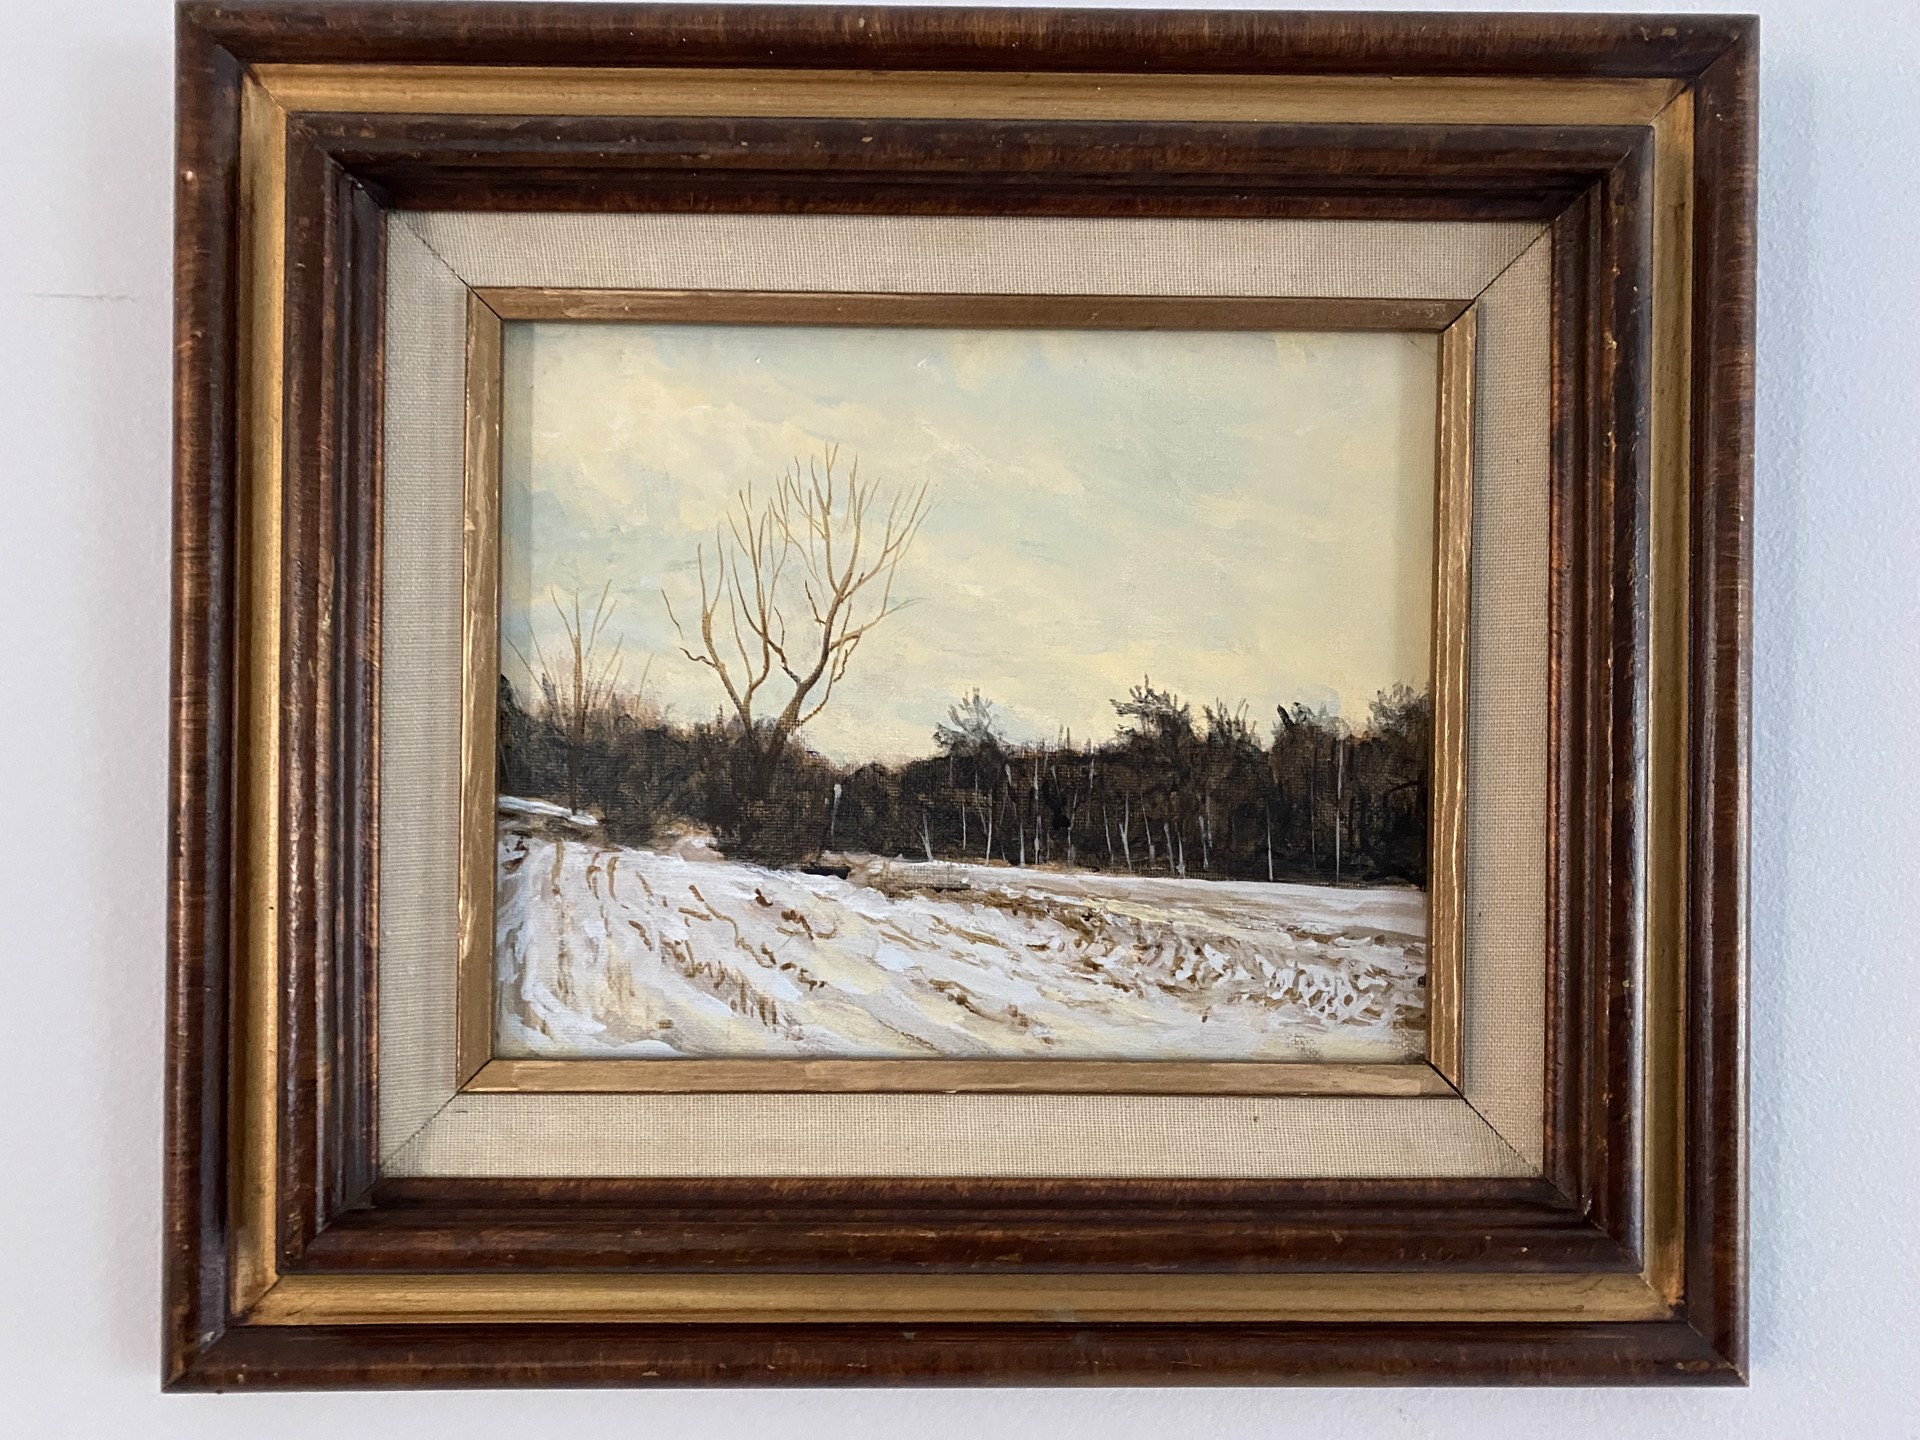 Hill in Winter by Douglas H. Caves Sr.